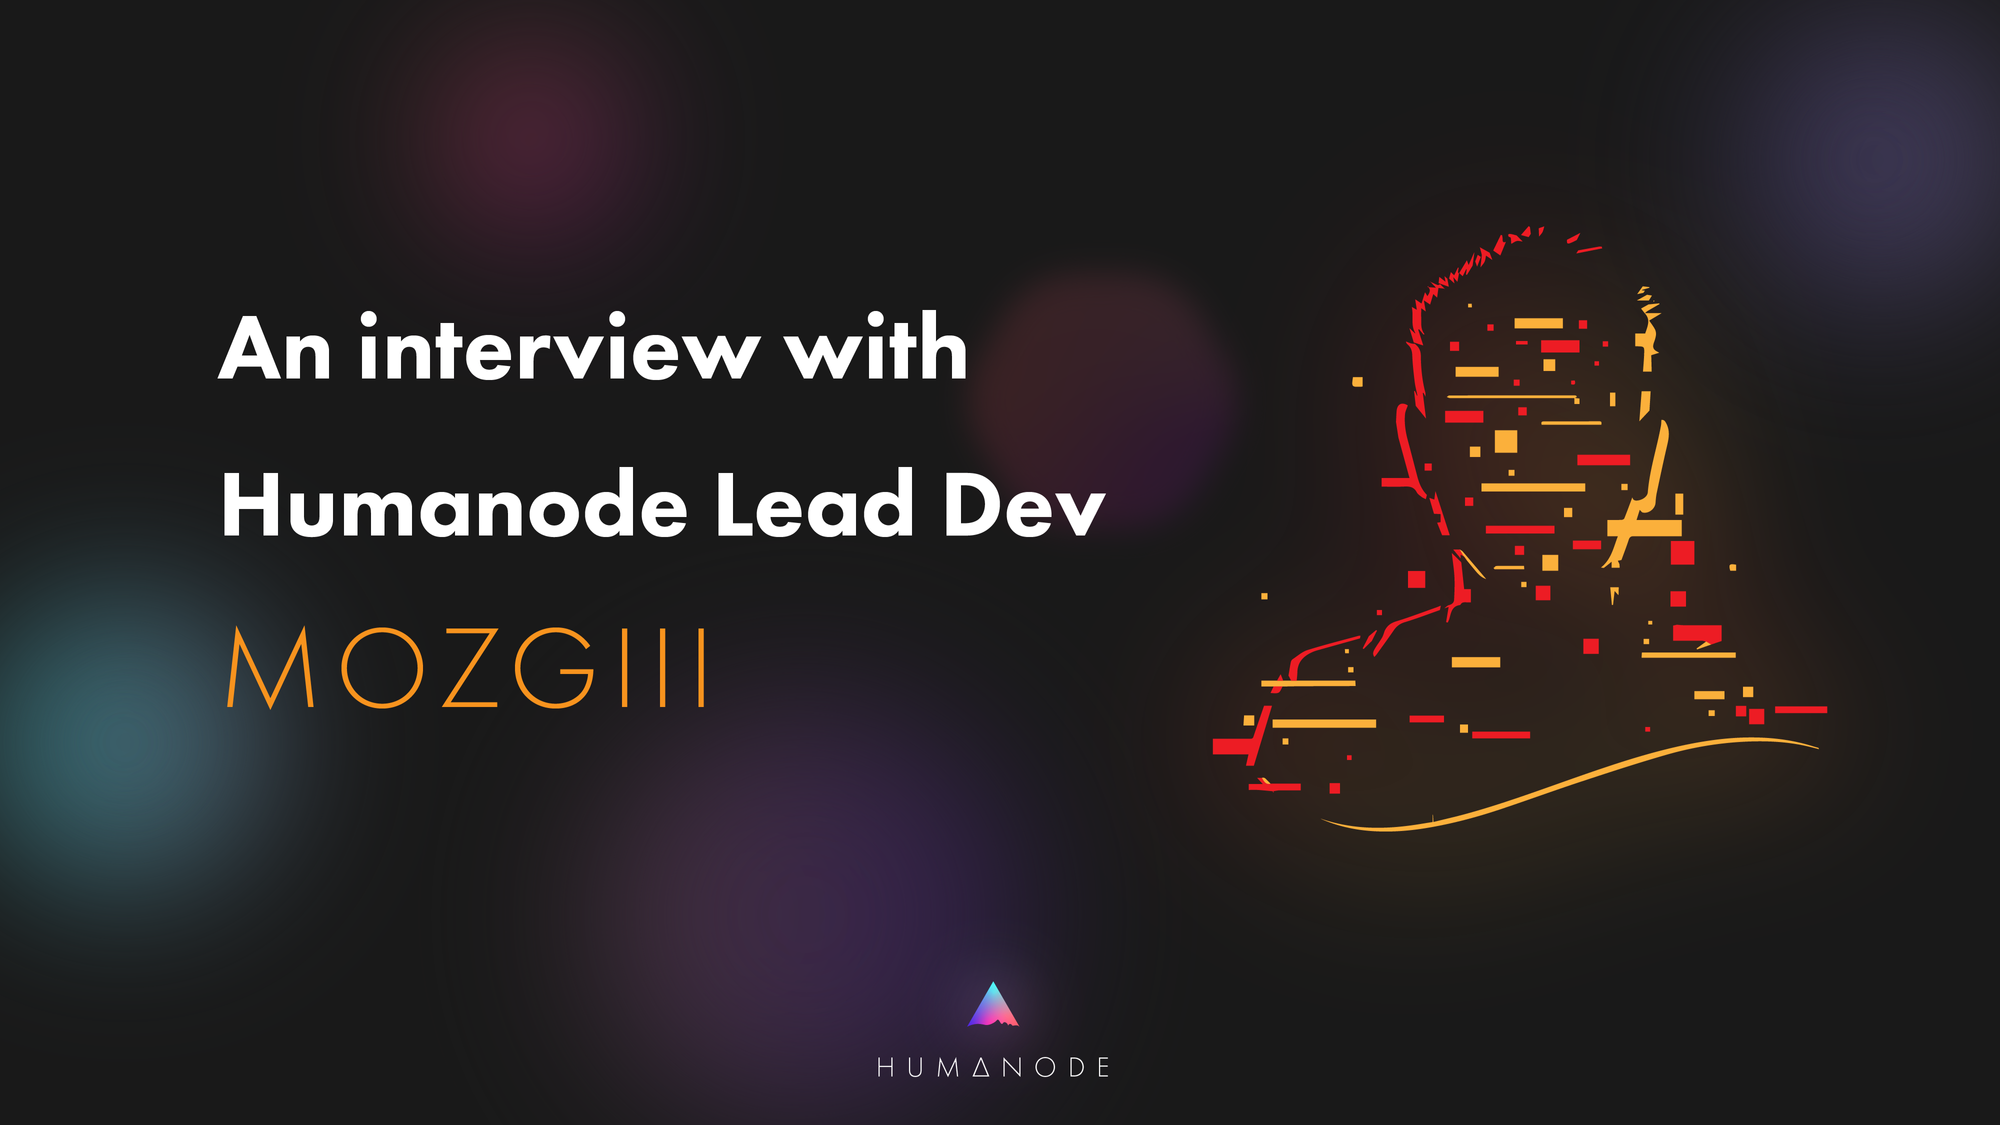 An Interview with Humanode Lead Dev: MOZGIII